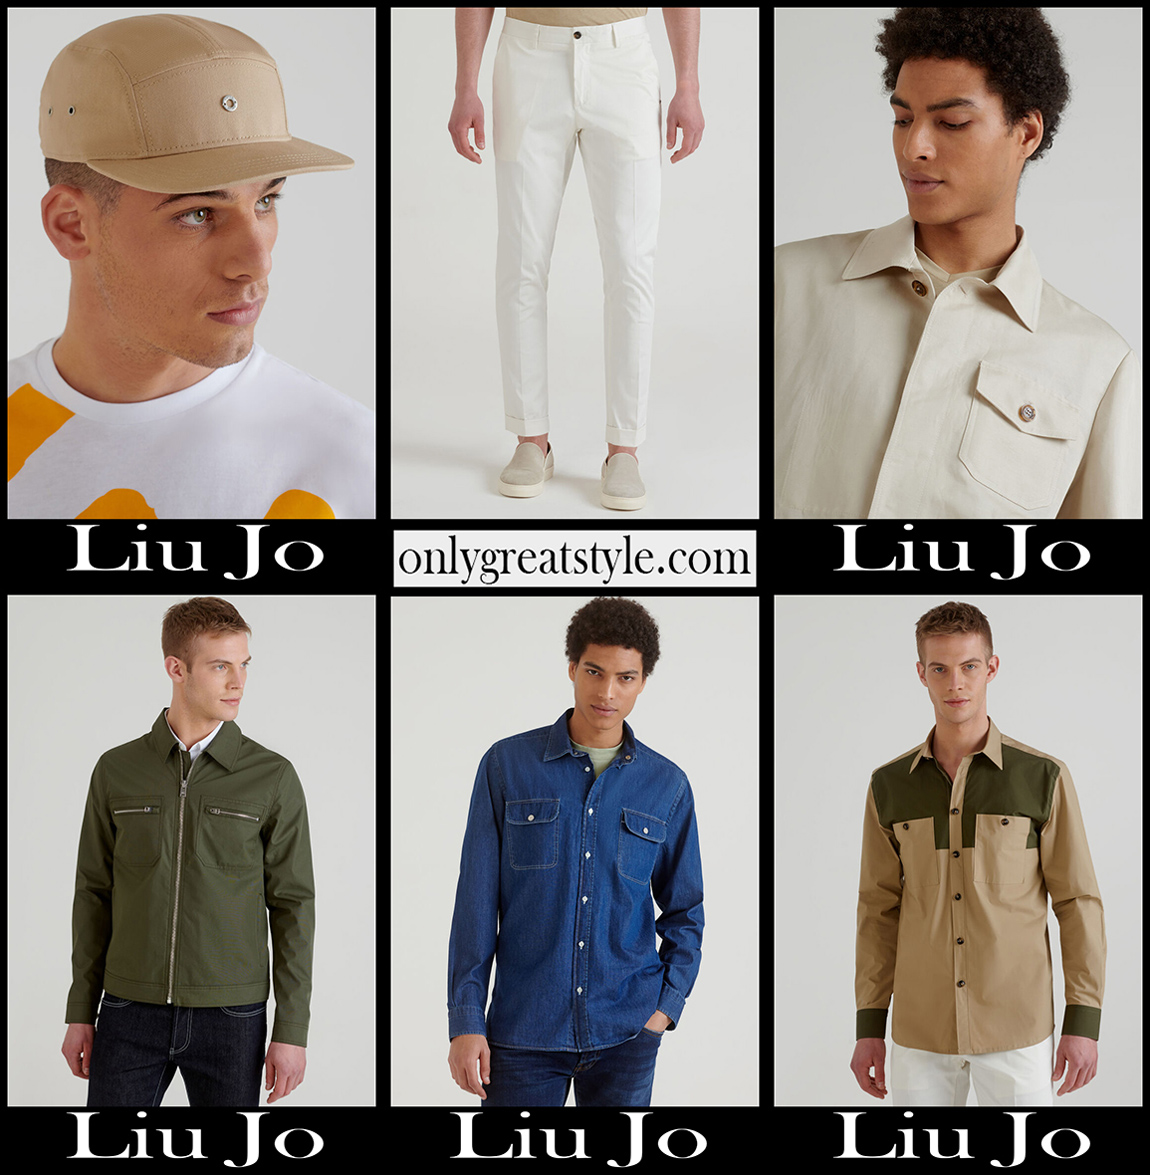 Liu Jo new arrivals 2021 mens clothing collection style